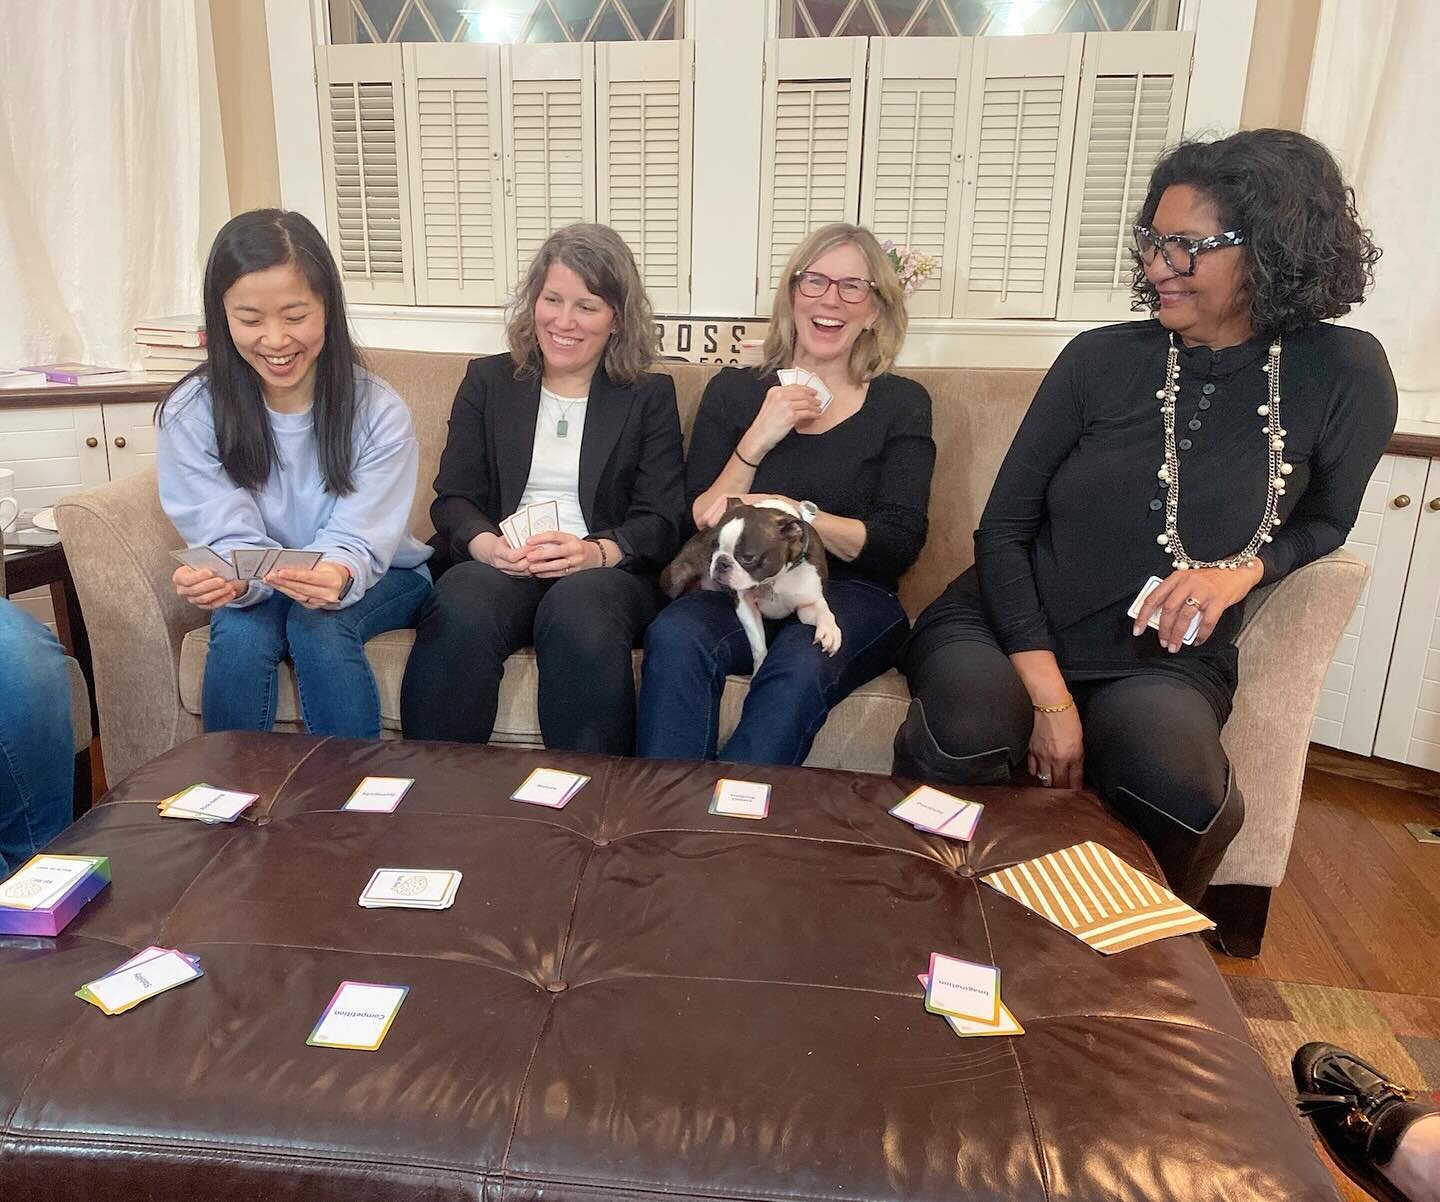 One of our faves from Diana&rsquo;s hosted games night ✨ 

Looking for a fun and unique way to connect with friends?! Val-You is the perfect addition to your next games night! Not sure where to start? Bring us in and we&rsquo;ll lead your group throu